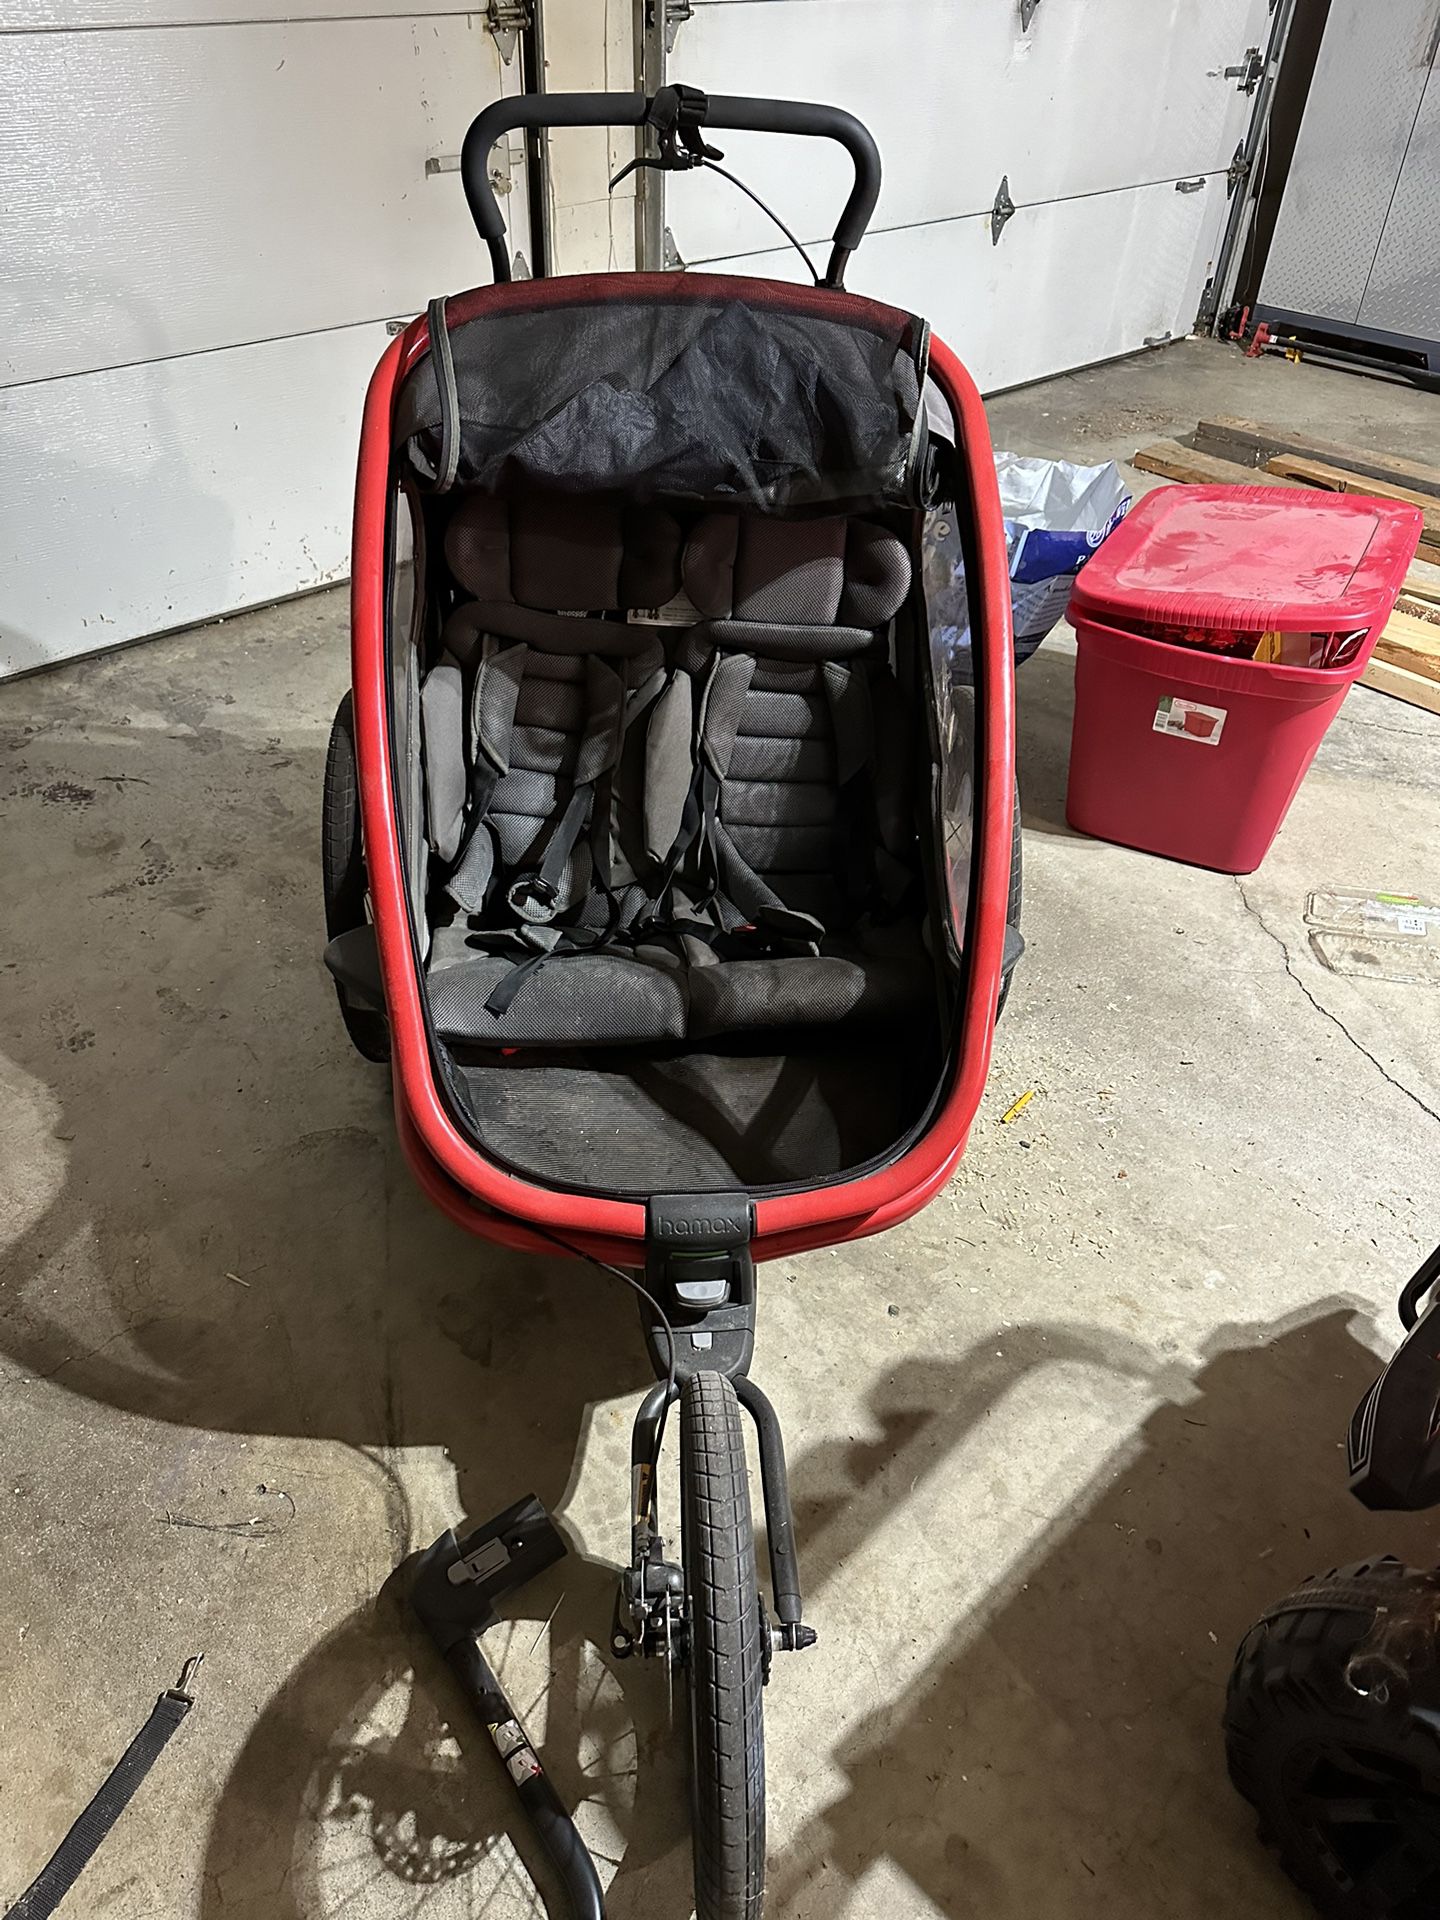 Double Stroller With Jogging/Bike Attachment- Hamax Outback